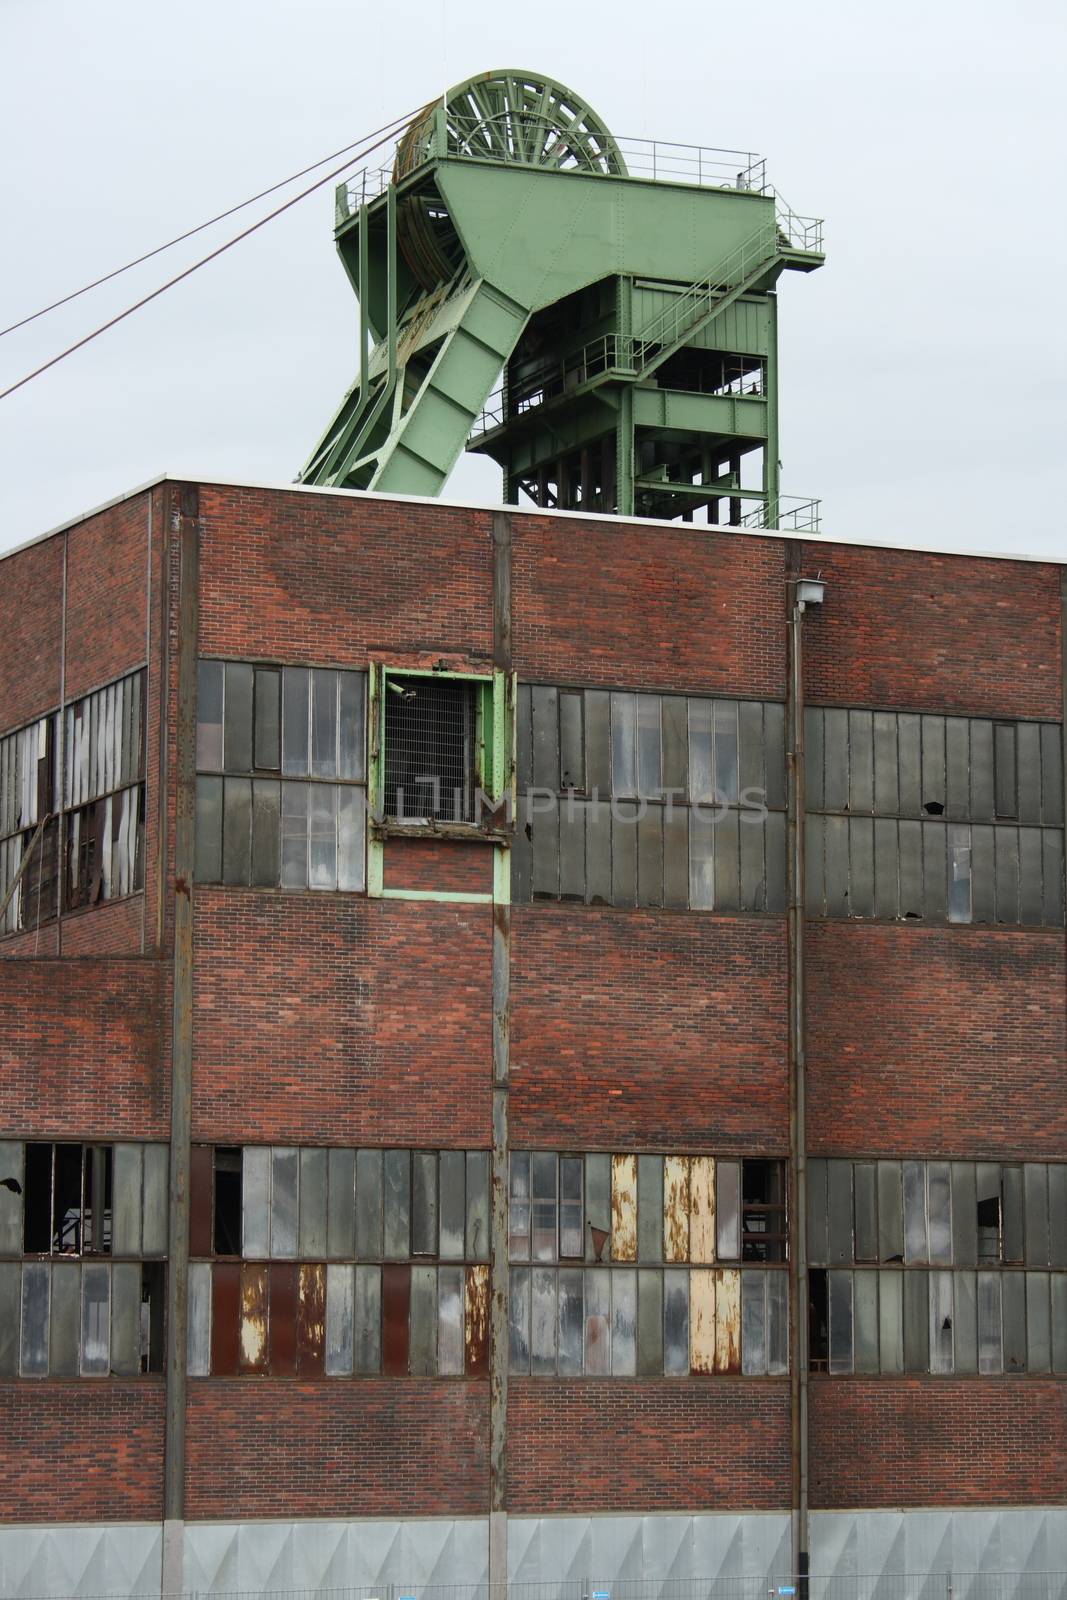 old industrial ruin with winding tower on the roof